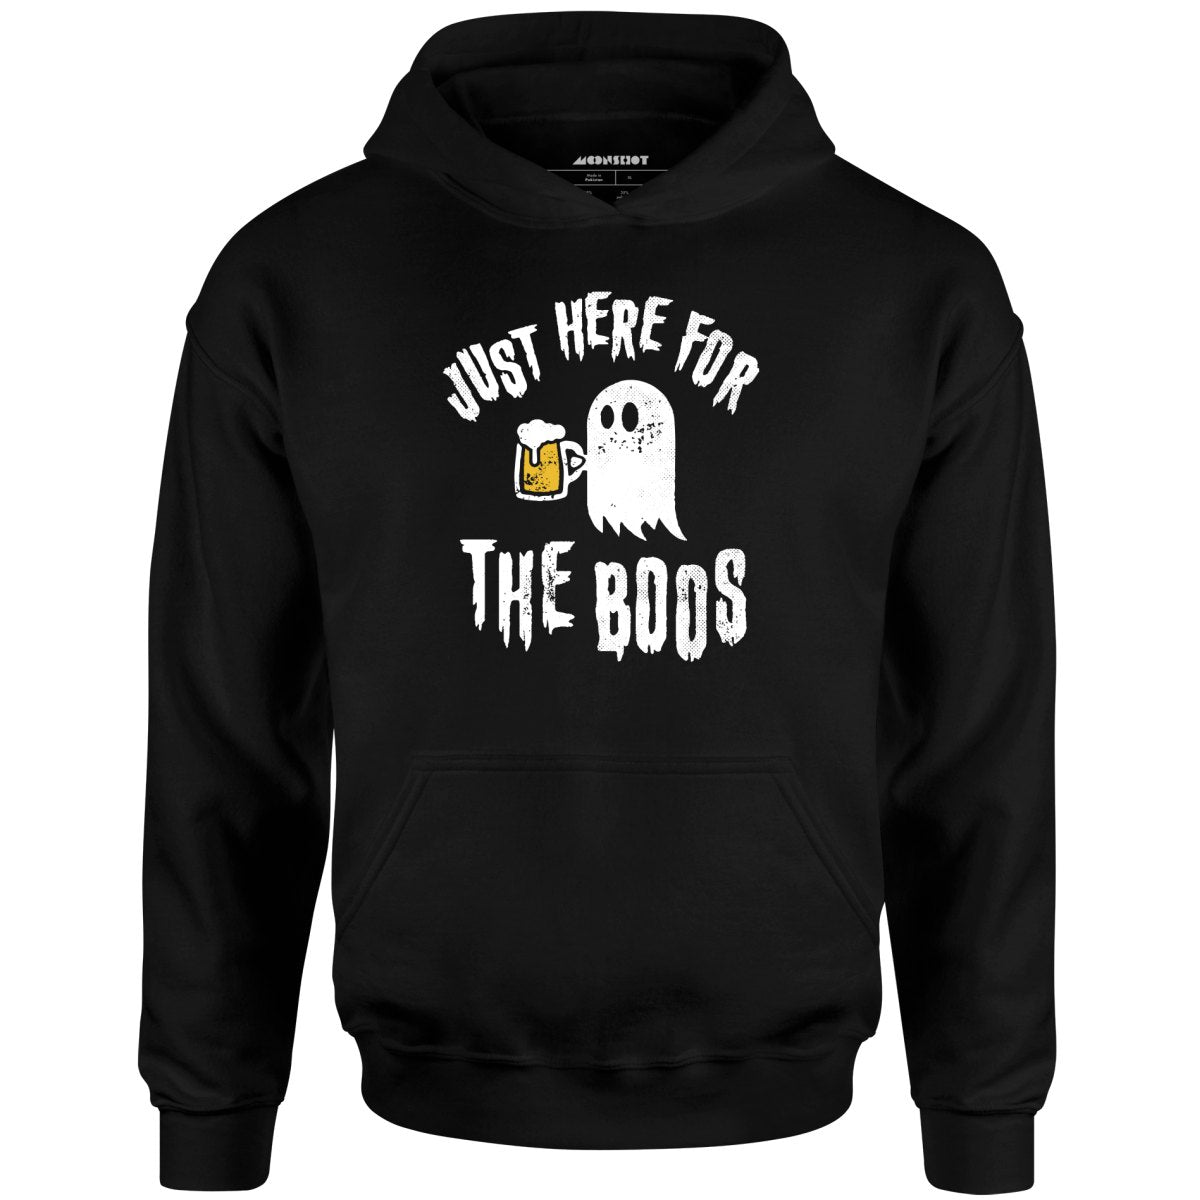 Just Here for the Boos - Unisex Hoodie